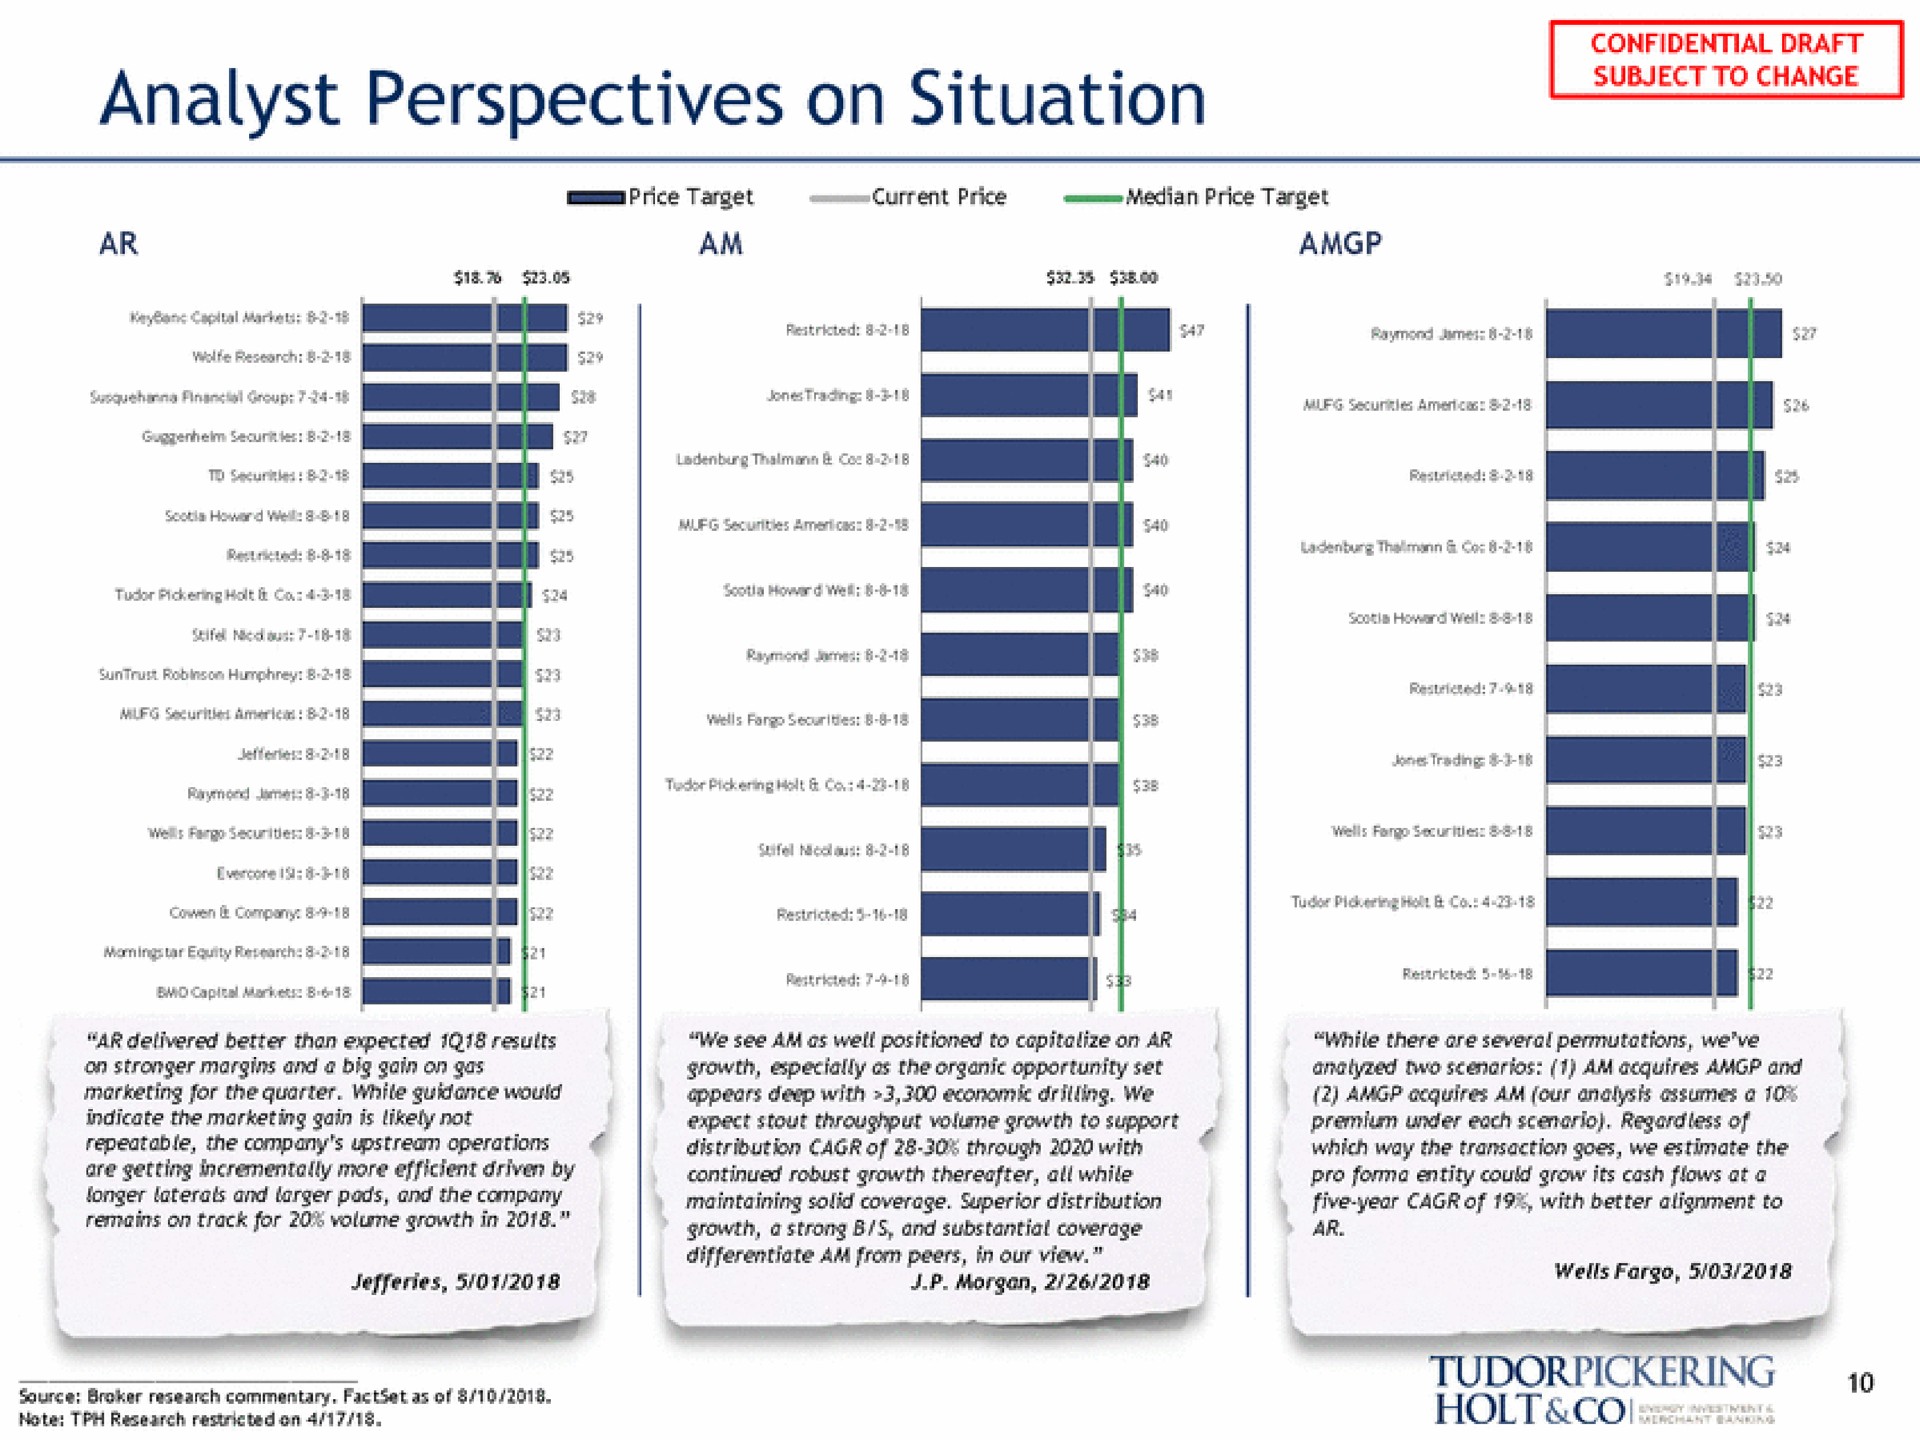 analyst perspectives on situation subject to change | Tudor, Pickering, Holt & Co